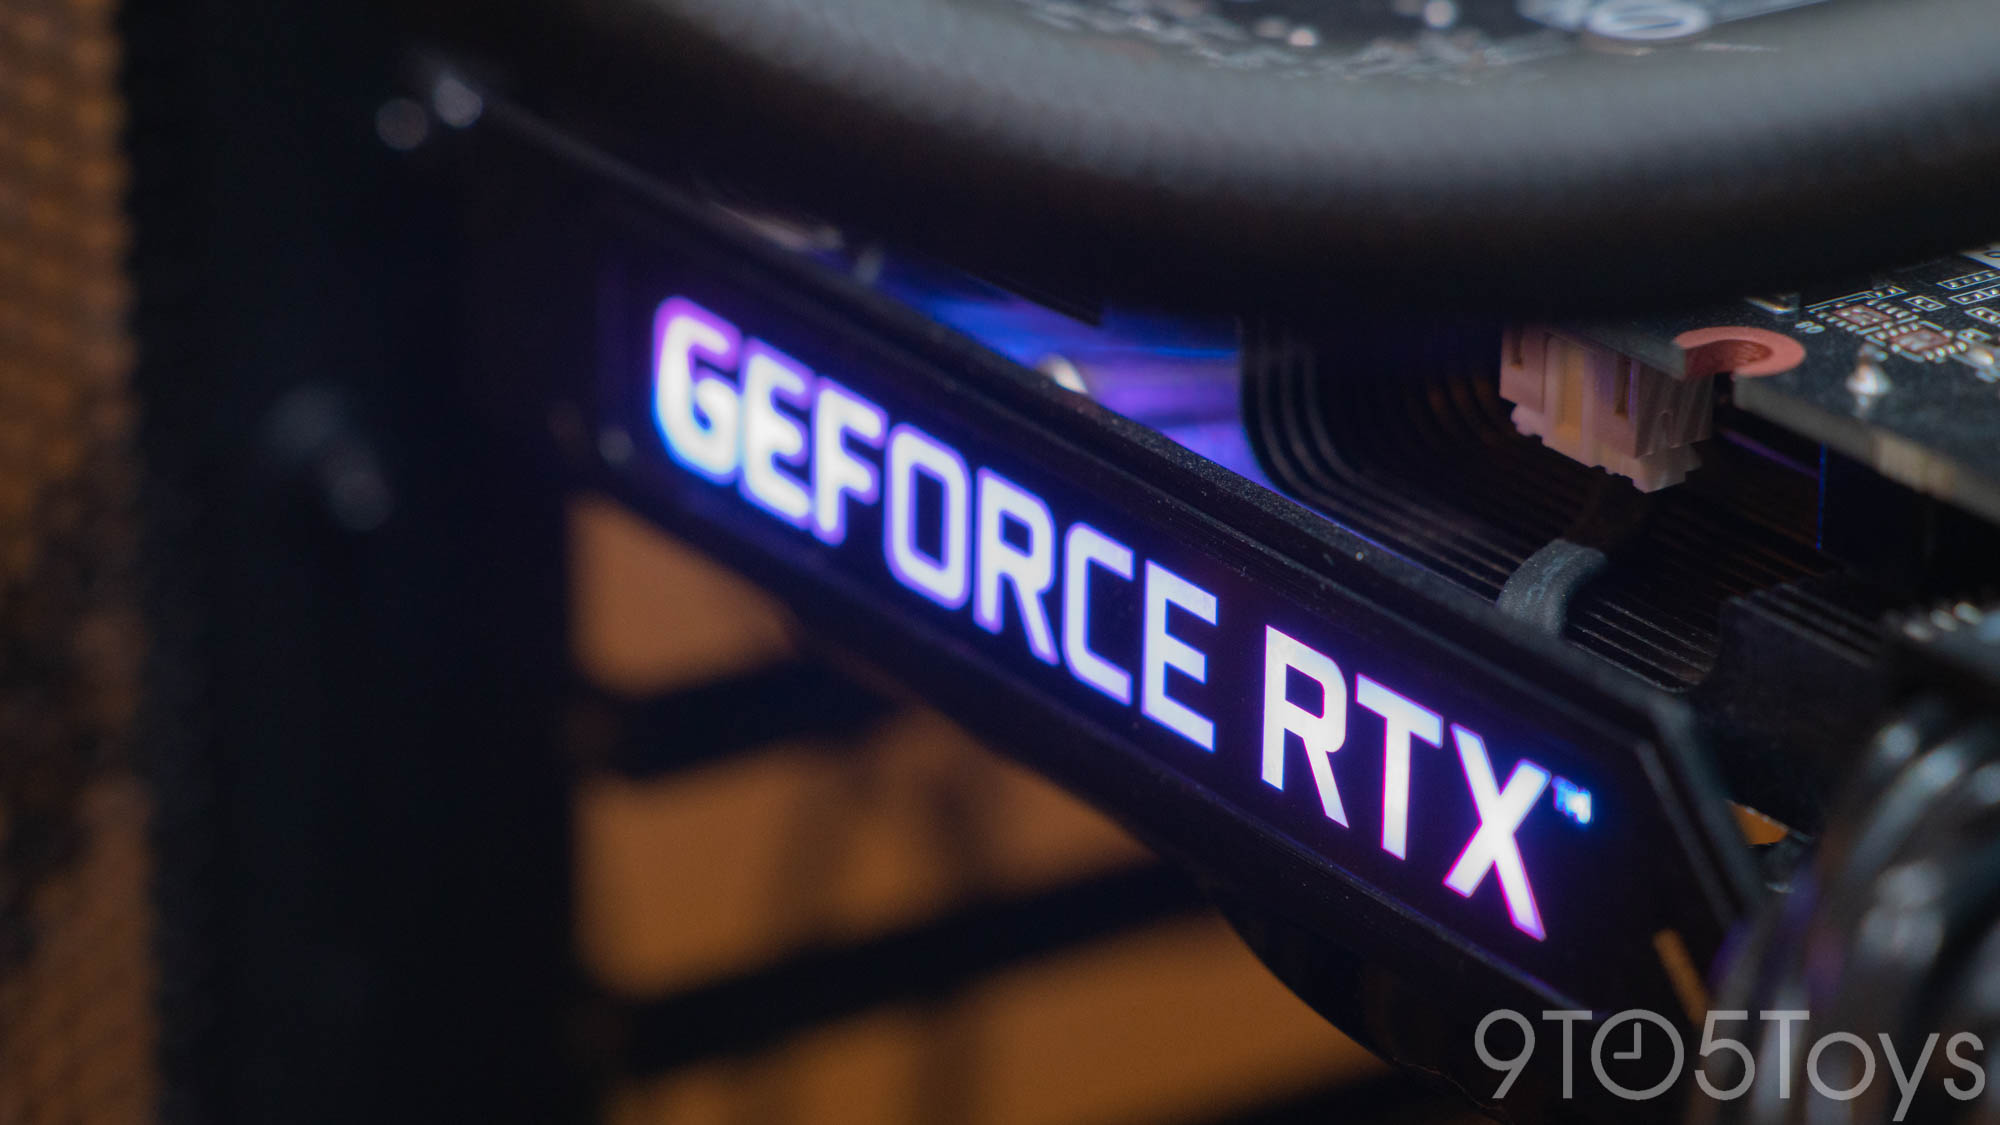 Is the RTX 3060 still worth it? Our hands-on review says yes